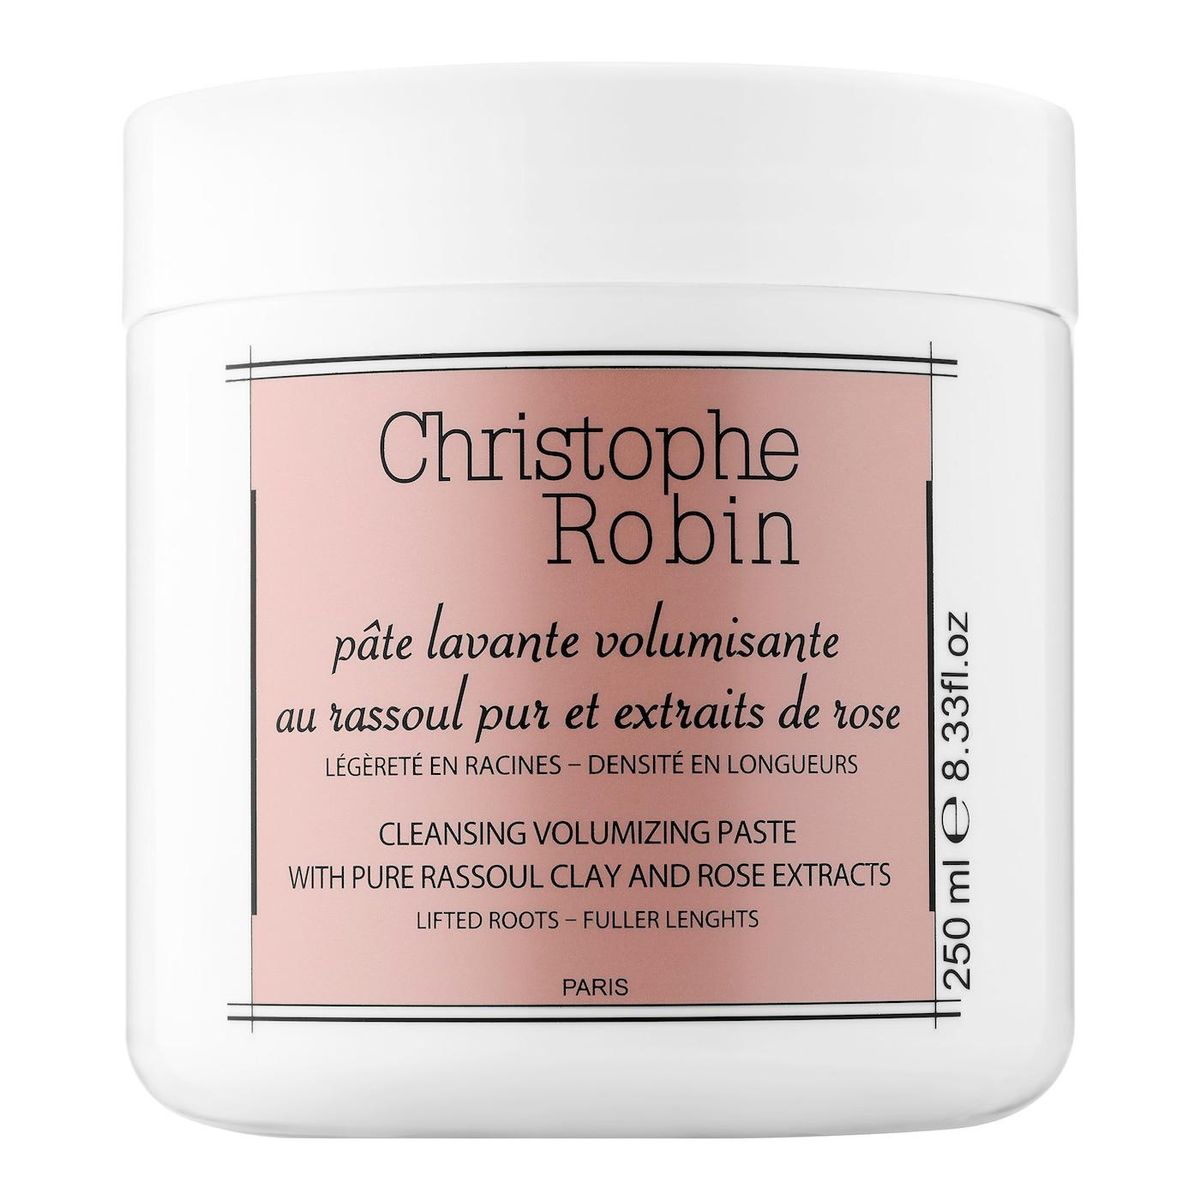 christophe robin volume shampoo paste with rassoul clay and rose extracts 